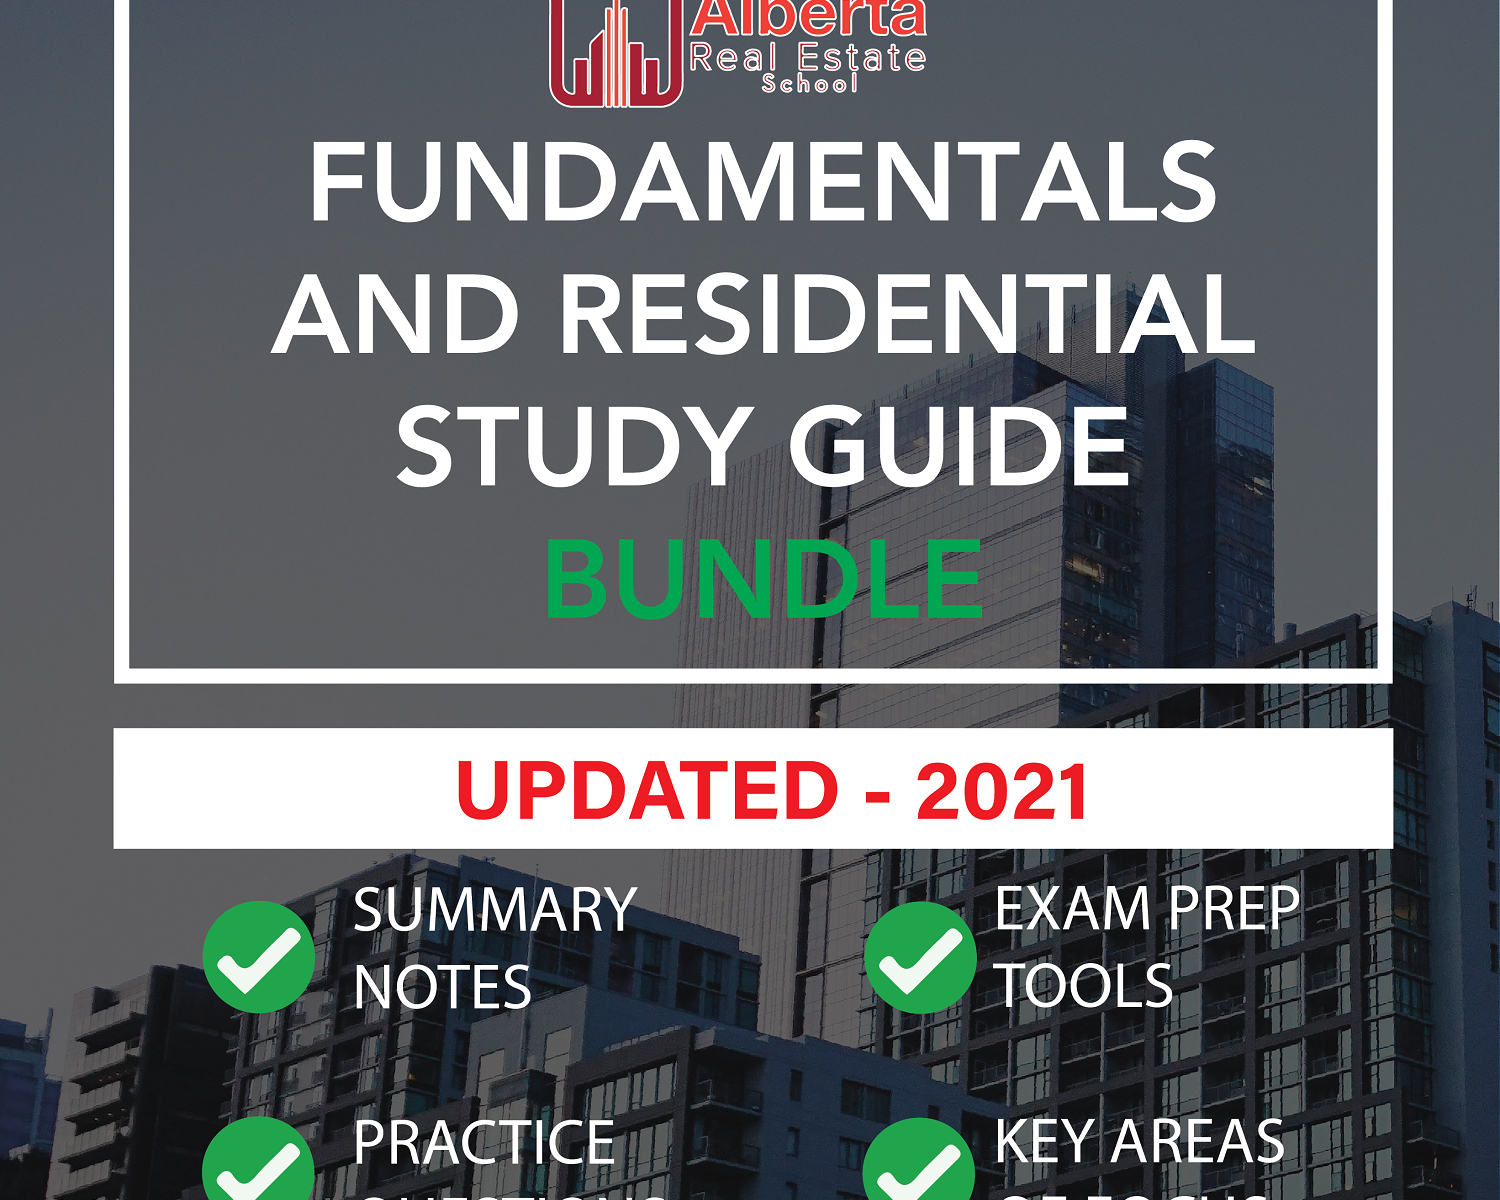 Extensive study guide for Fundamentals of Real Estate and Residential Real Estate Tutoring in Alberta.